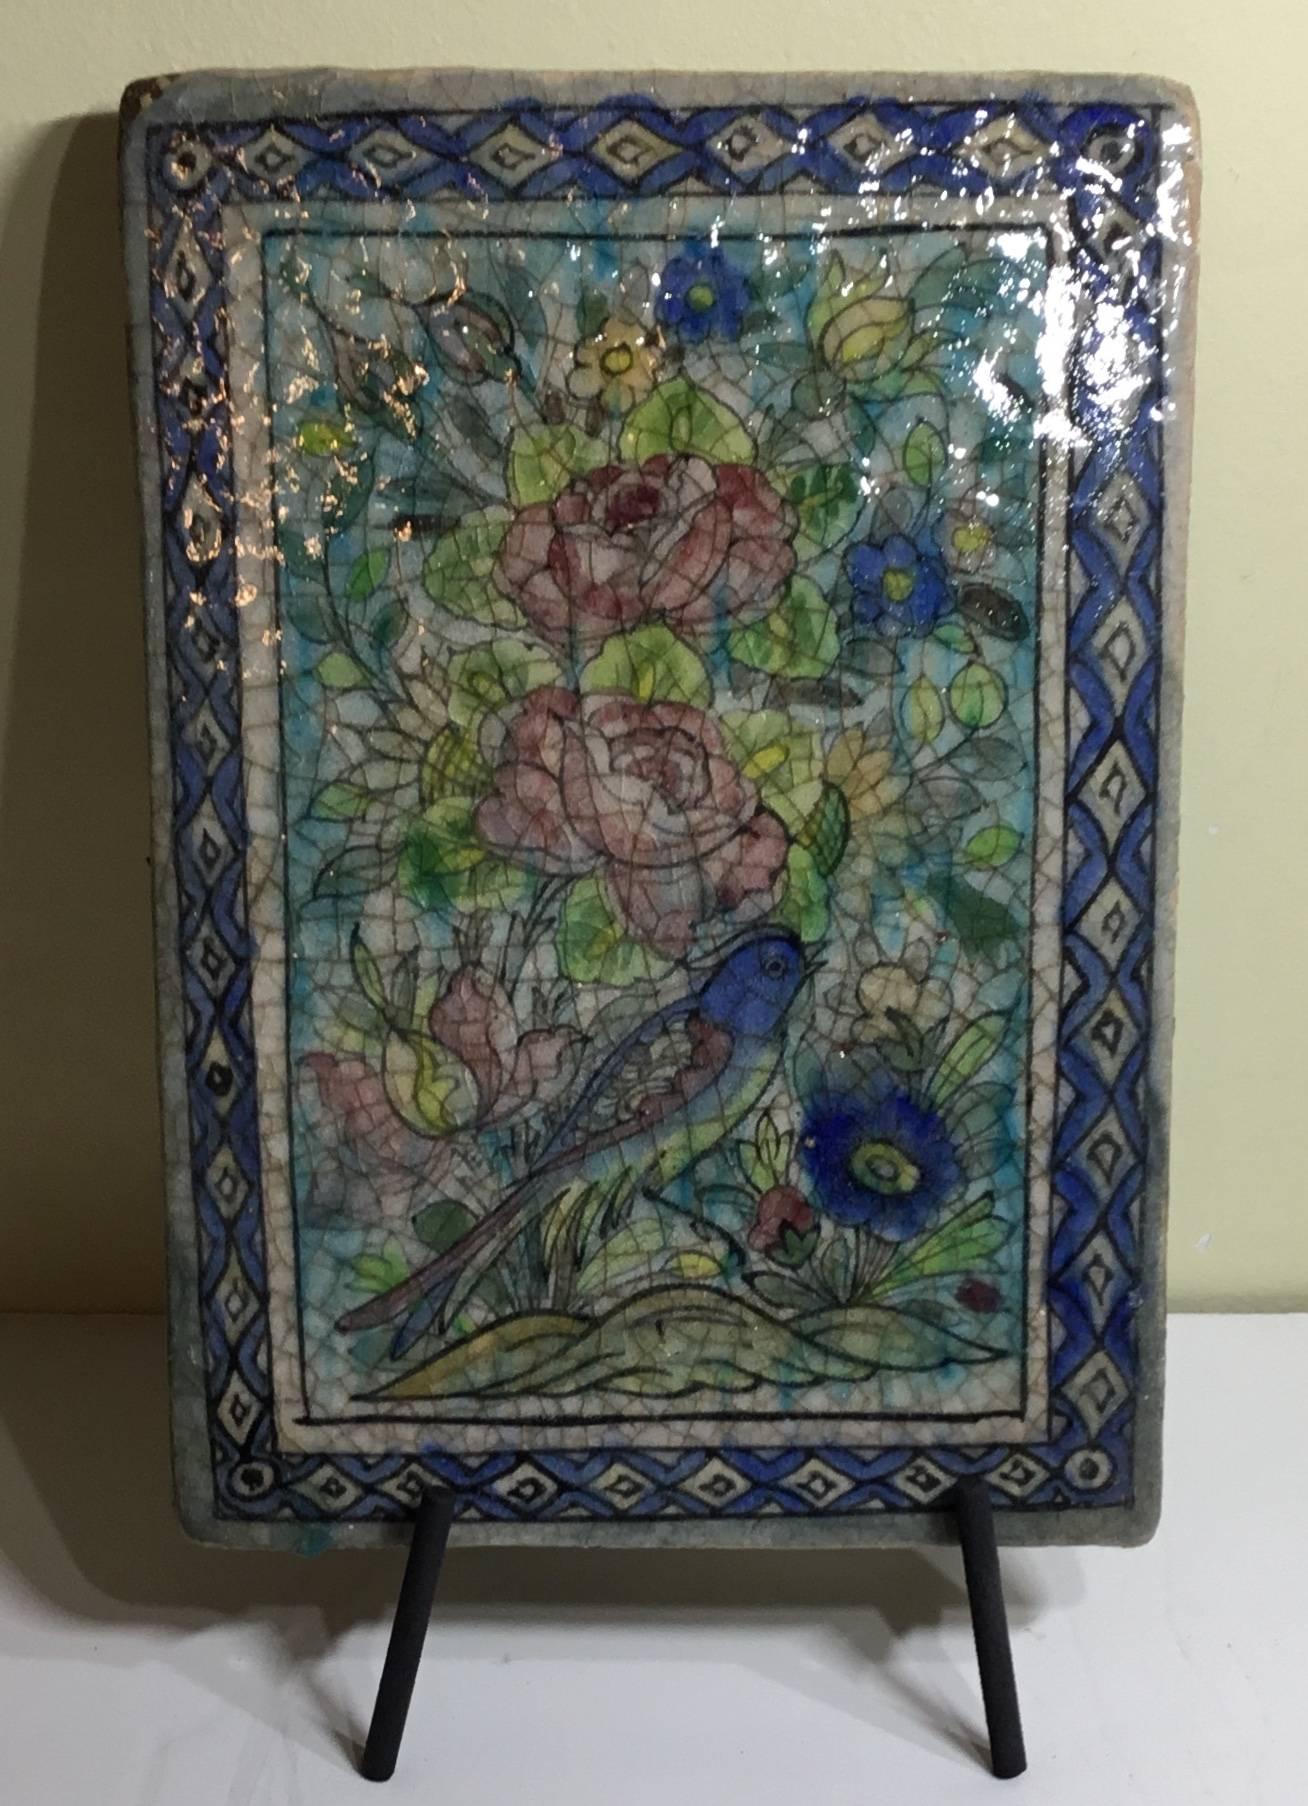 Beautiful Persian tile made of hand-painted and glazed ceramic, with bird surround flowers and vines .great decorative tile display.
Functional display piece included.